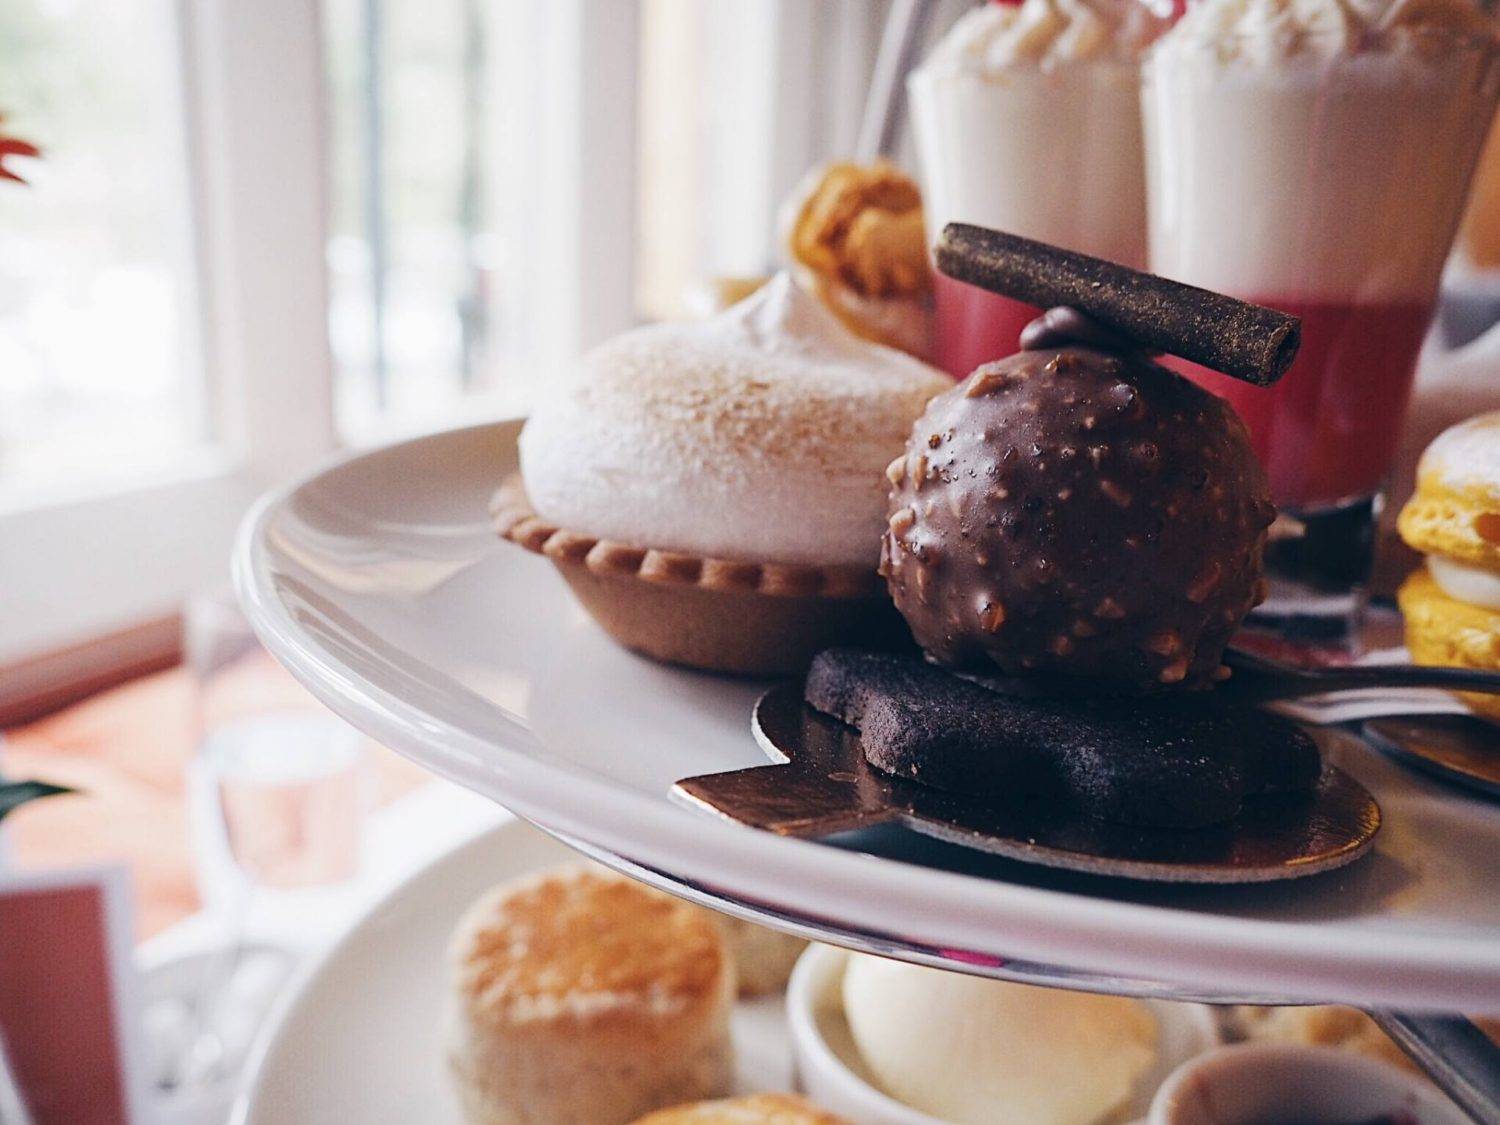 Jesmond Dene House Afternoon Tea review: best afternoon tea in Newcastle with macarons